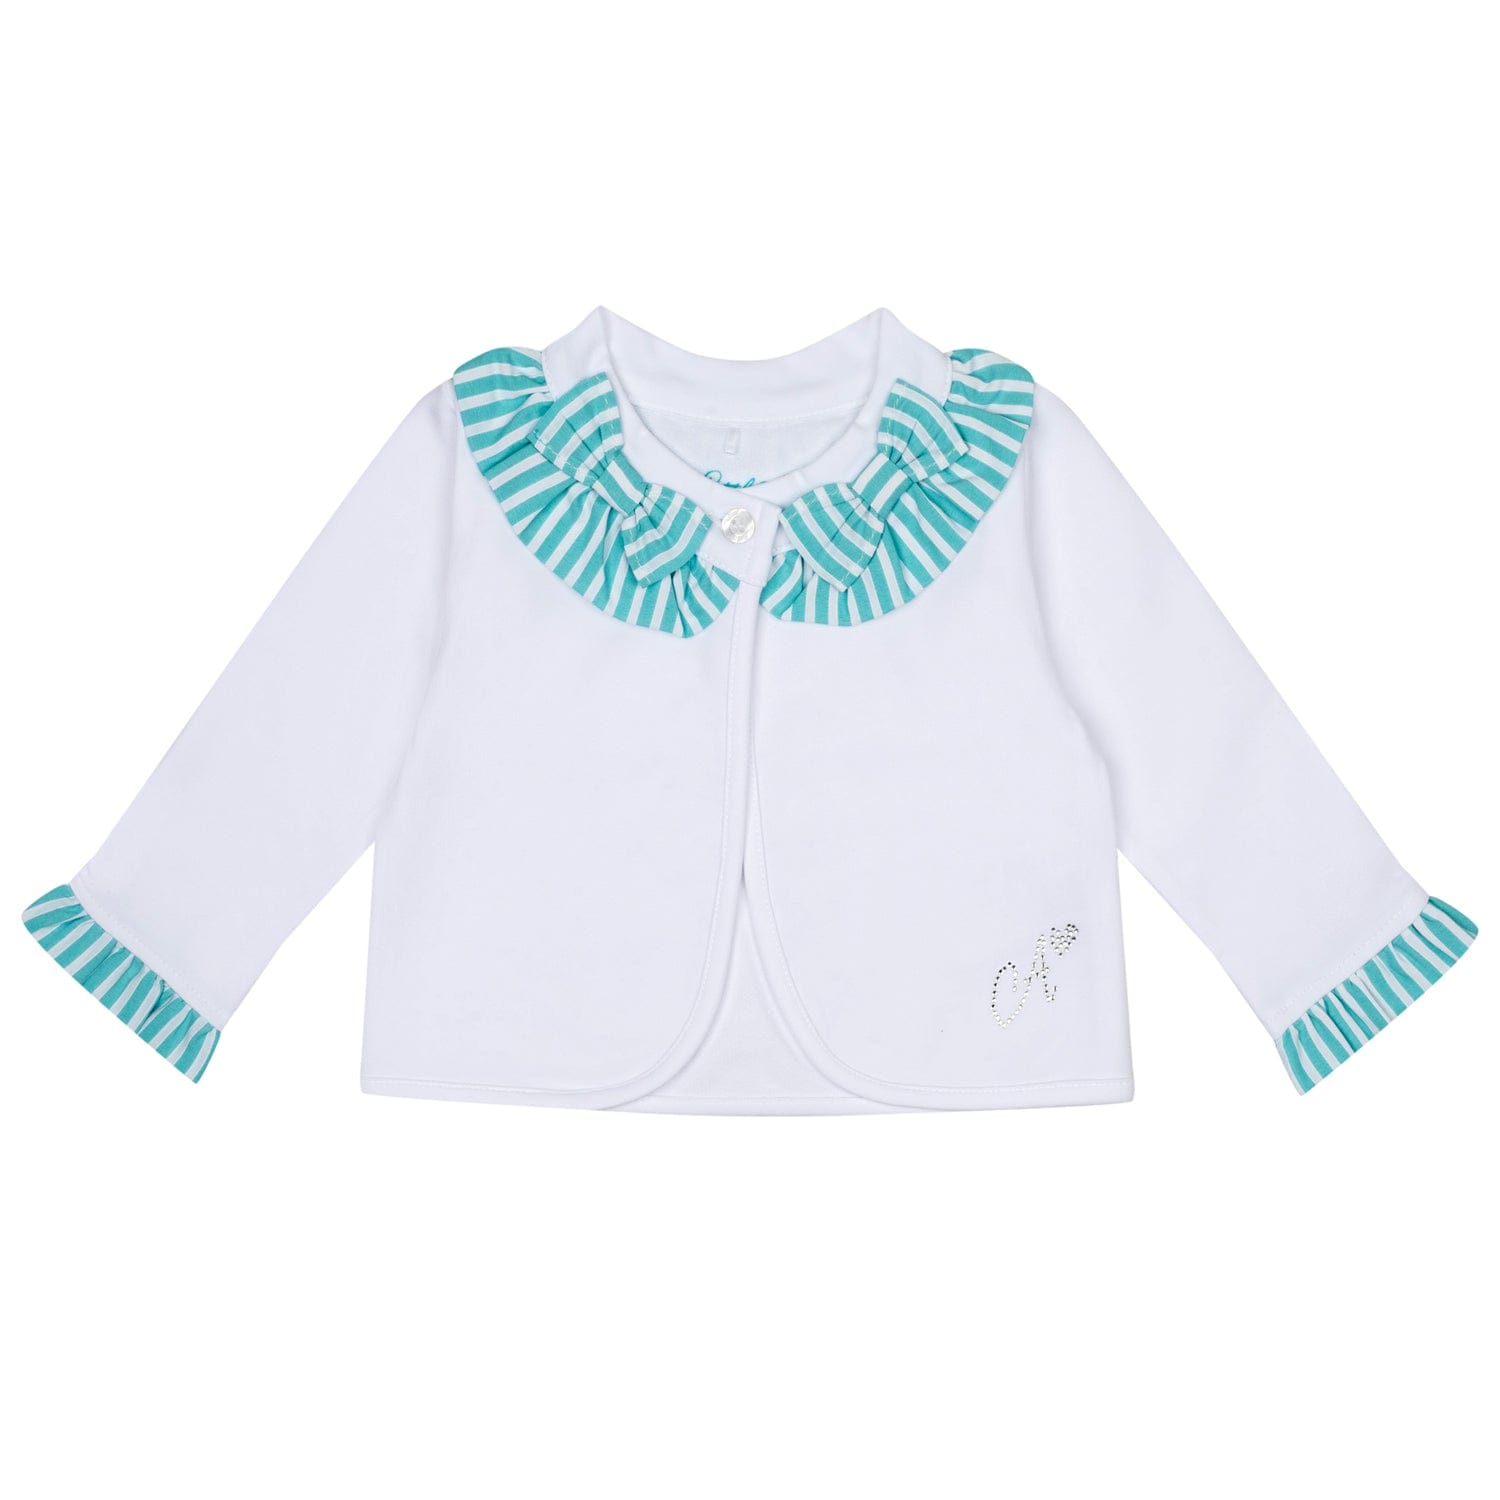 LITTLE A - Kaly Little Fish Cardigan - White